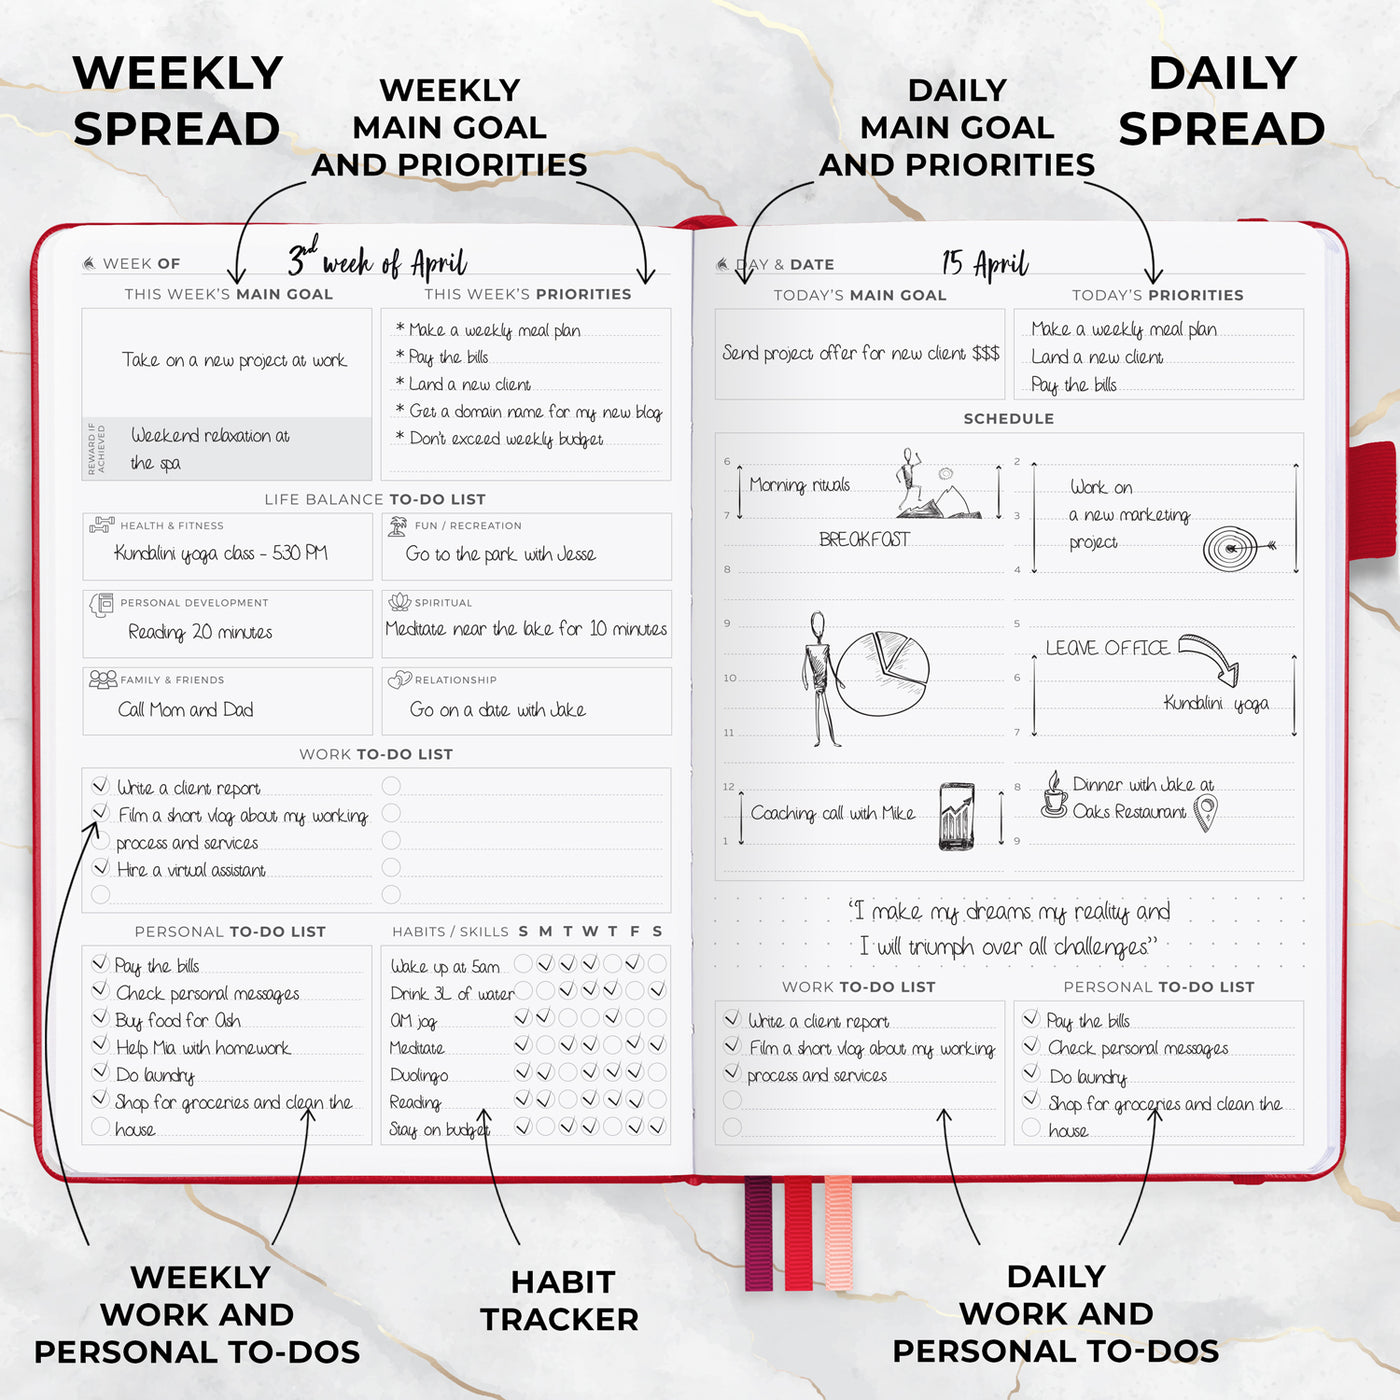 Undated Premium Edition Daily Planner - Take Smalls Steps Each Day & Achieve Your Life Goals